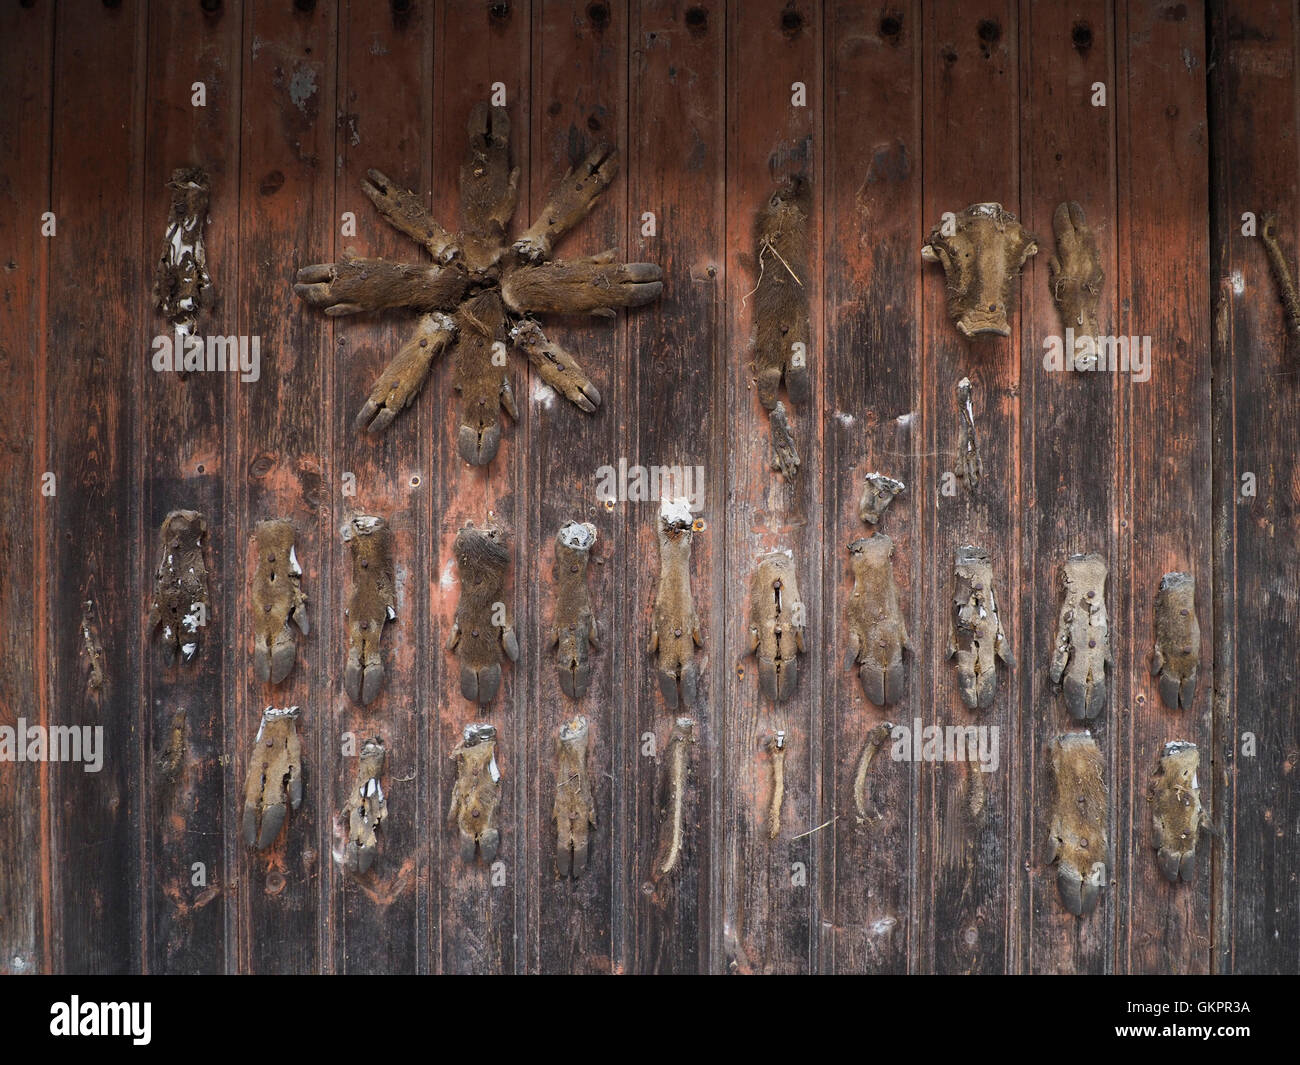 Wild boar feet nailed to a very old barn door in the mountain village of Palairac, Languedoc Roussillon, southern France Stock Photo